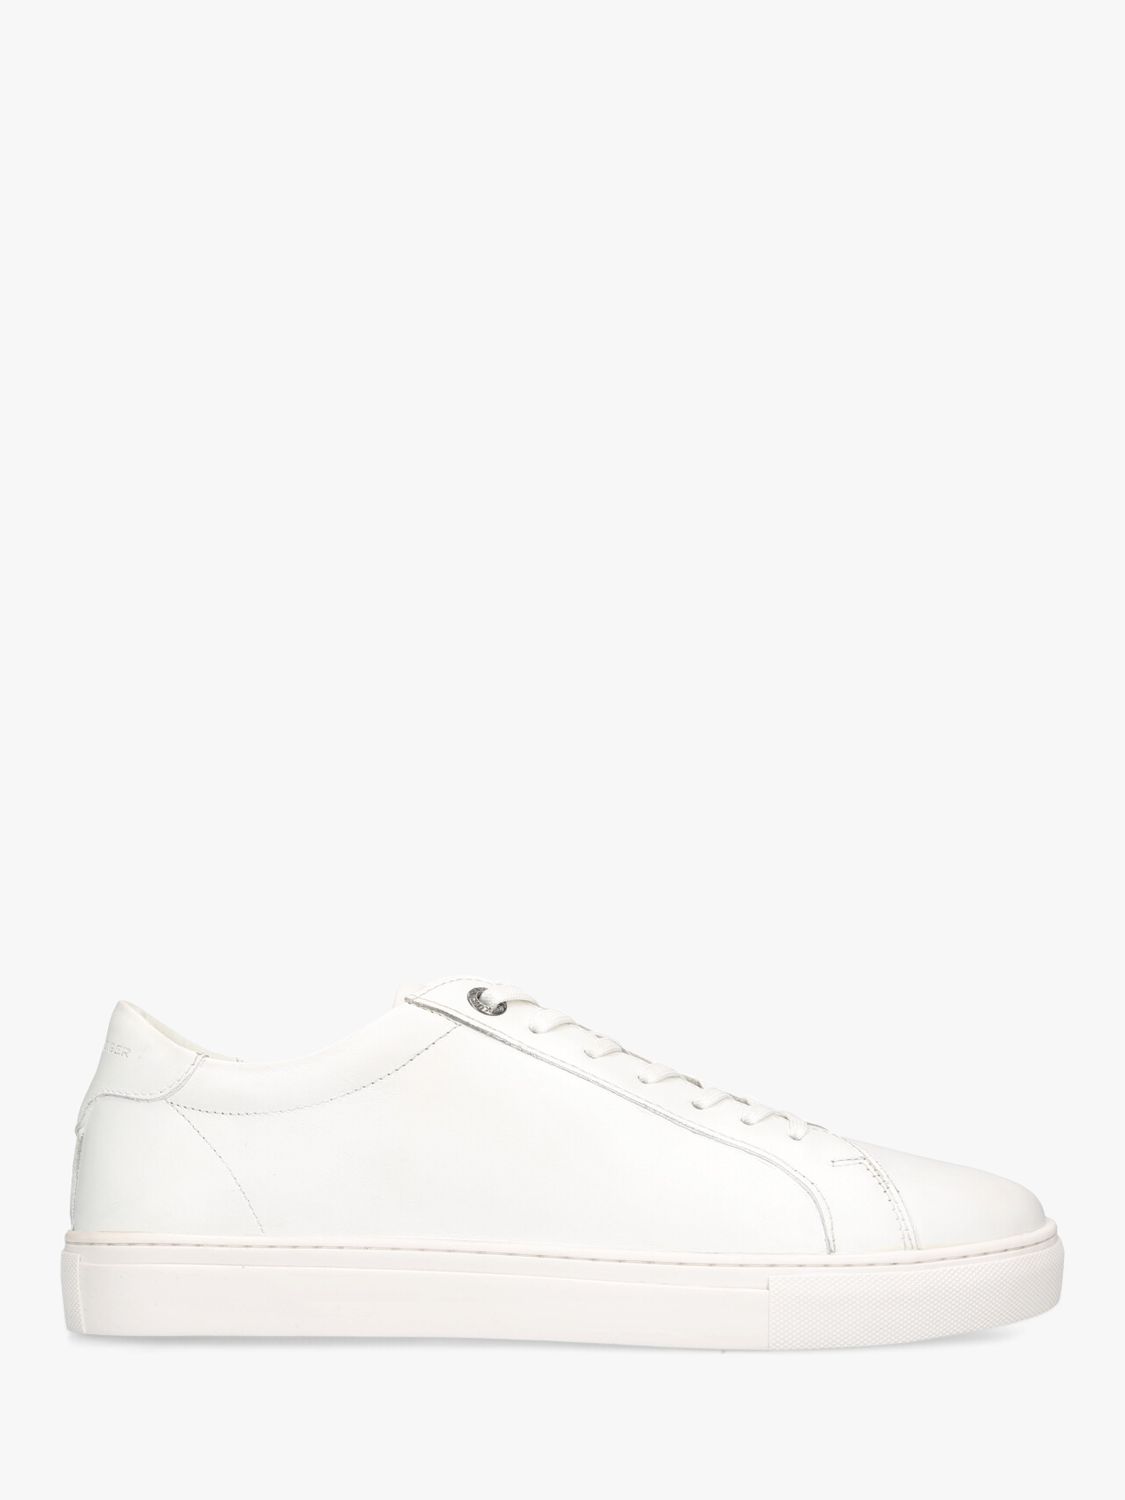 KG Kurt Geiger Fire Leather Trainers, White at John Lewis & Partners